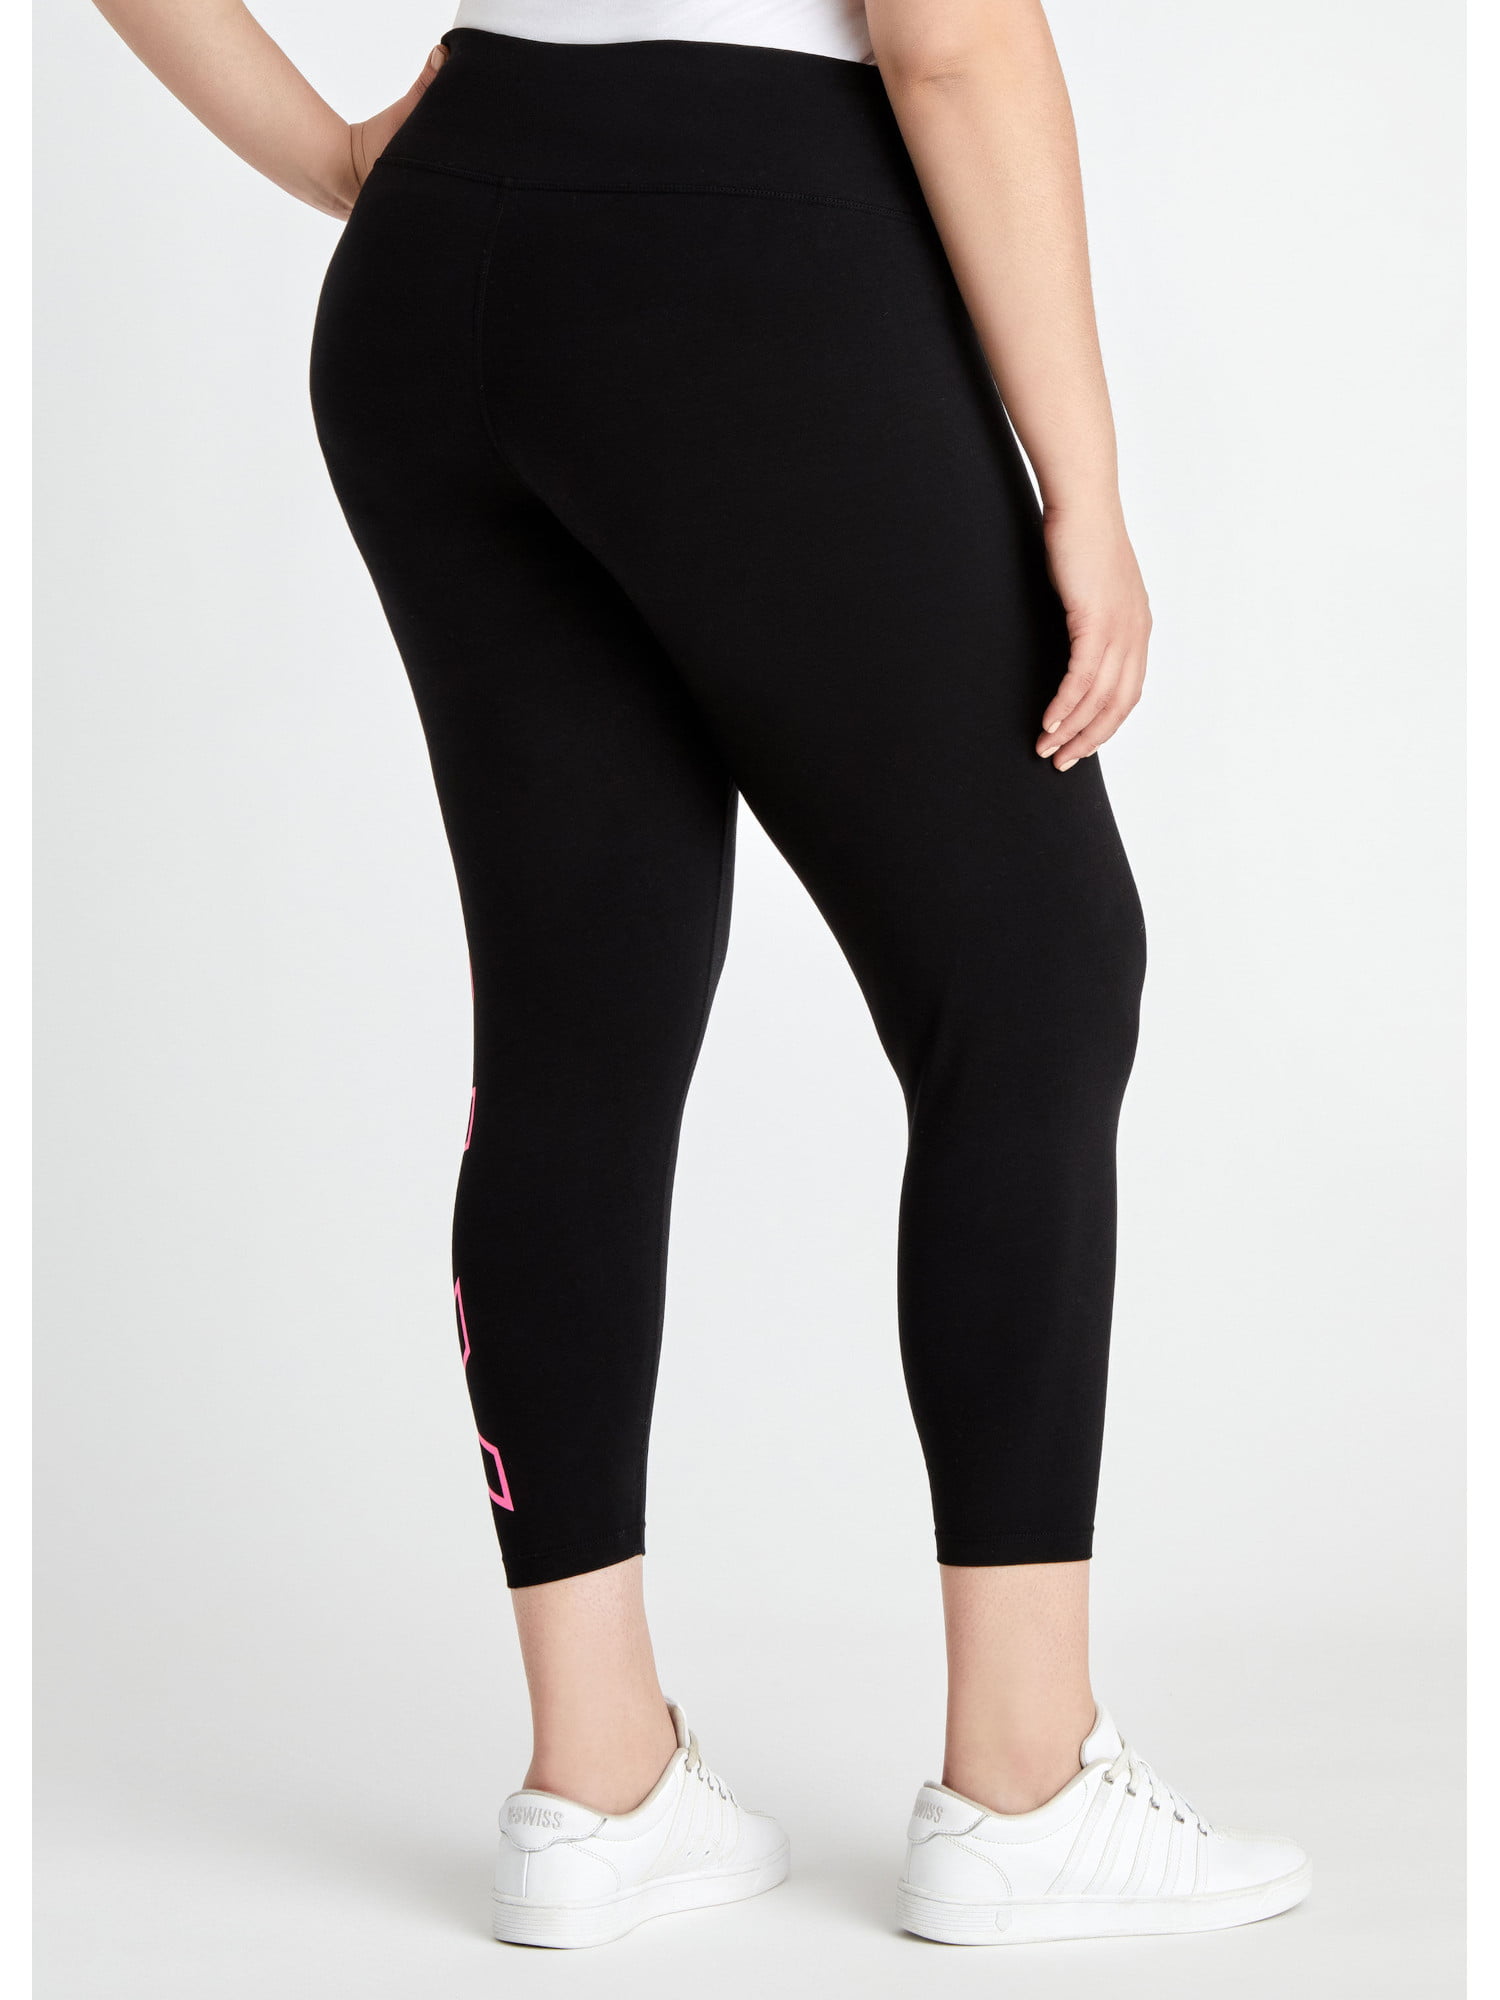 DKNY Women's Sport Tummy Control Workout Yoga Leggings, Black, X-Small :  Amazon.ca: Clothing, Shoes & Accessories